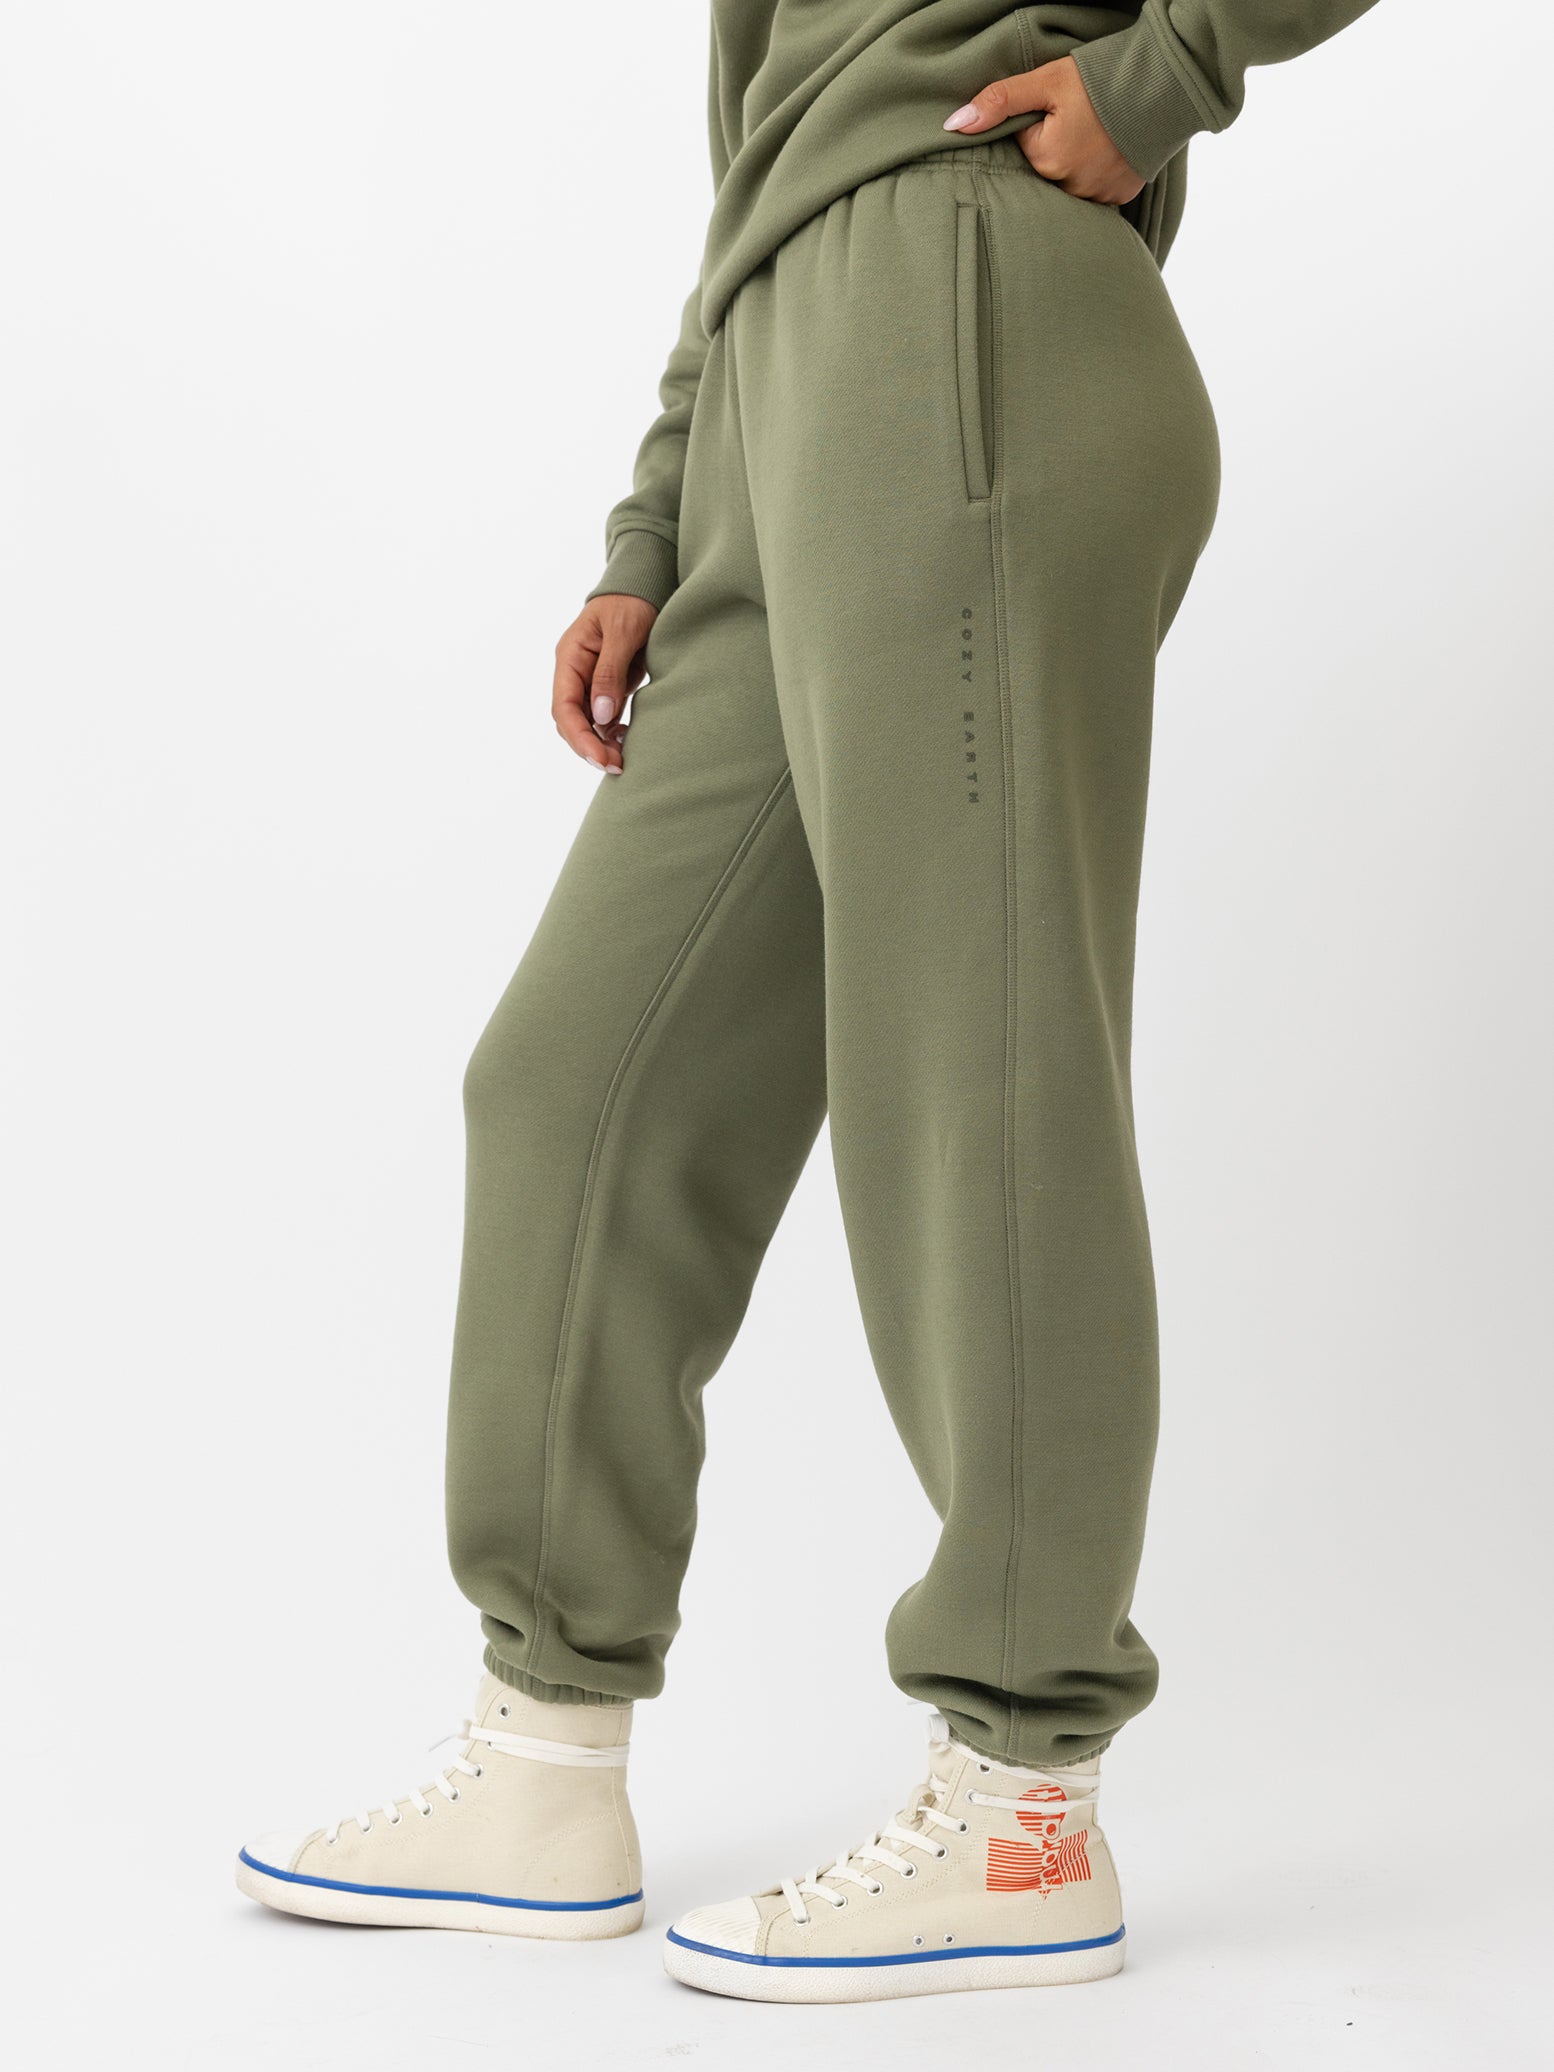  Woman wearing Juniper CityScape Sweat Pant with white background 